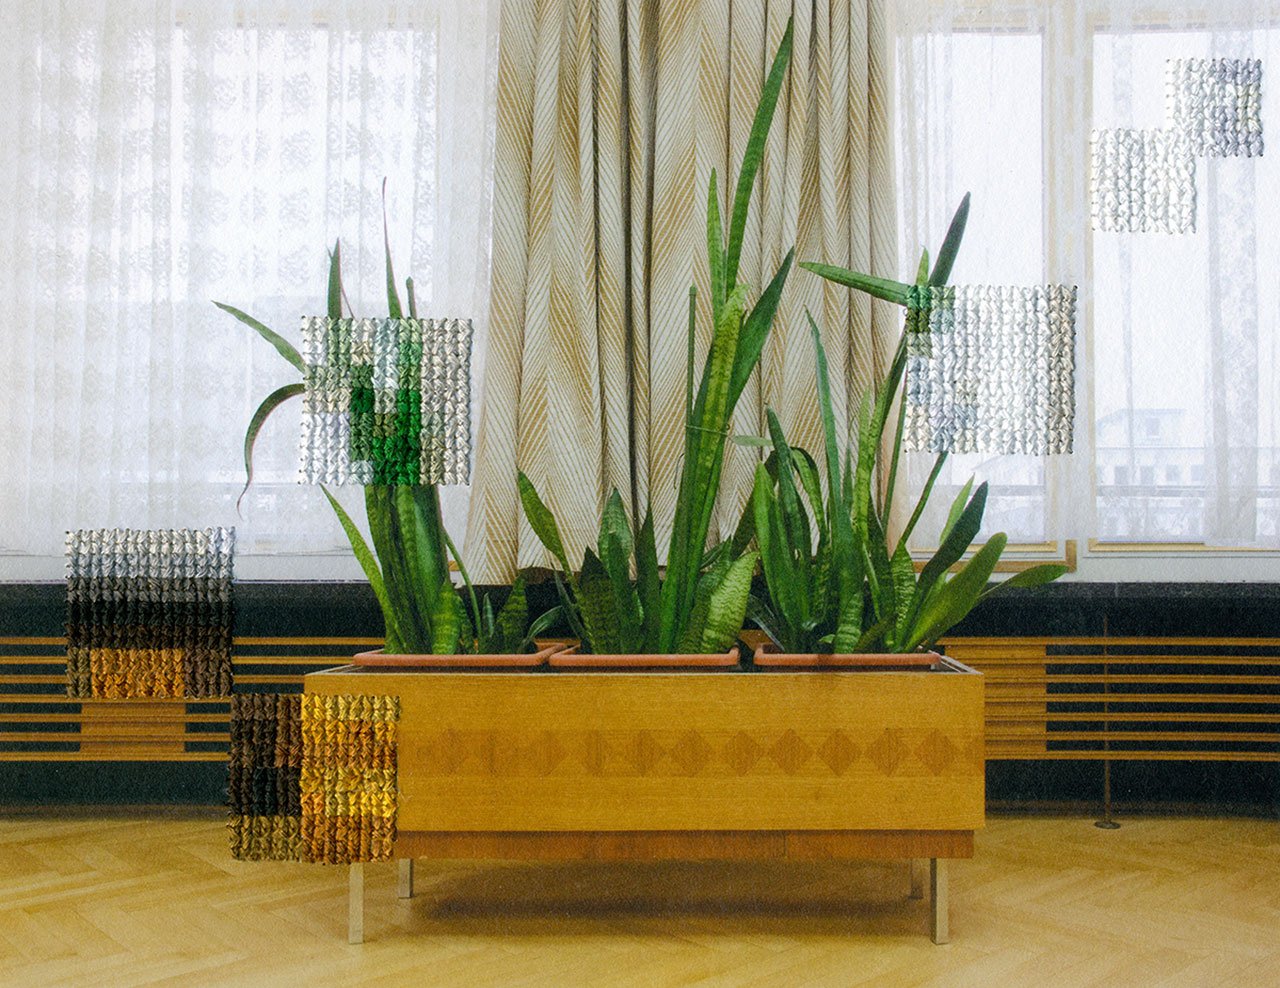 Berlin: Plants, Former Offices of the State Secret Police, 2012, photo © Diane Meyer